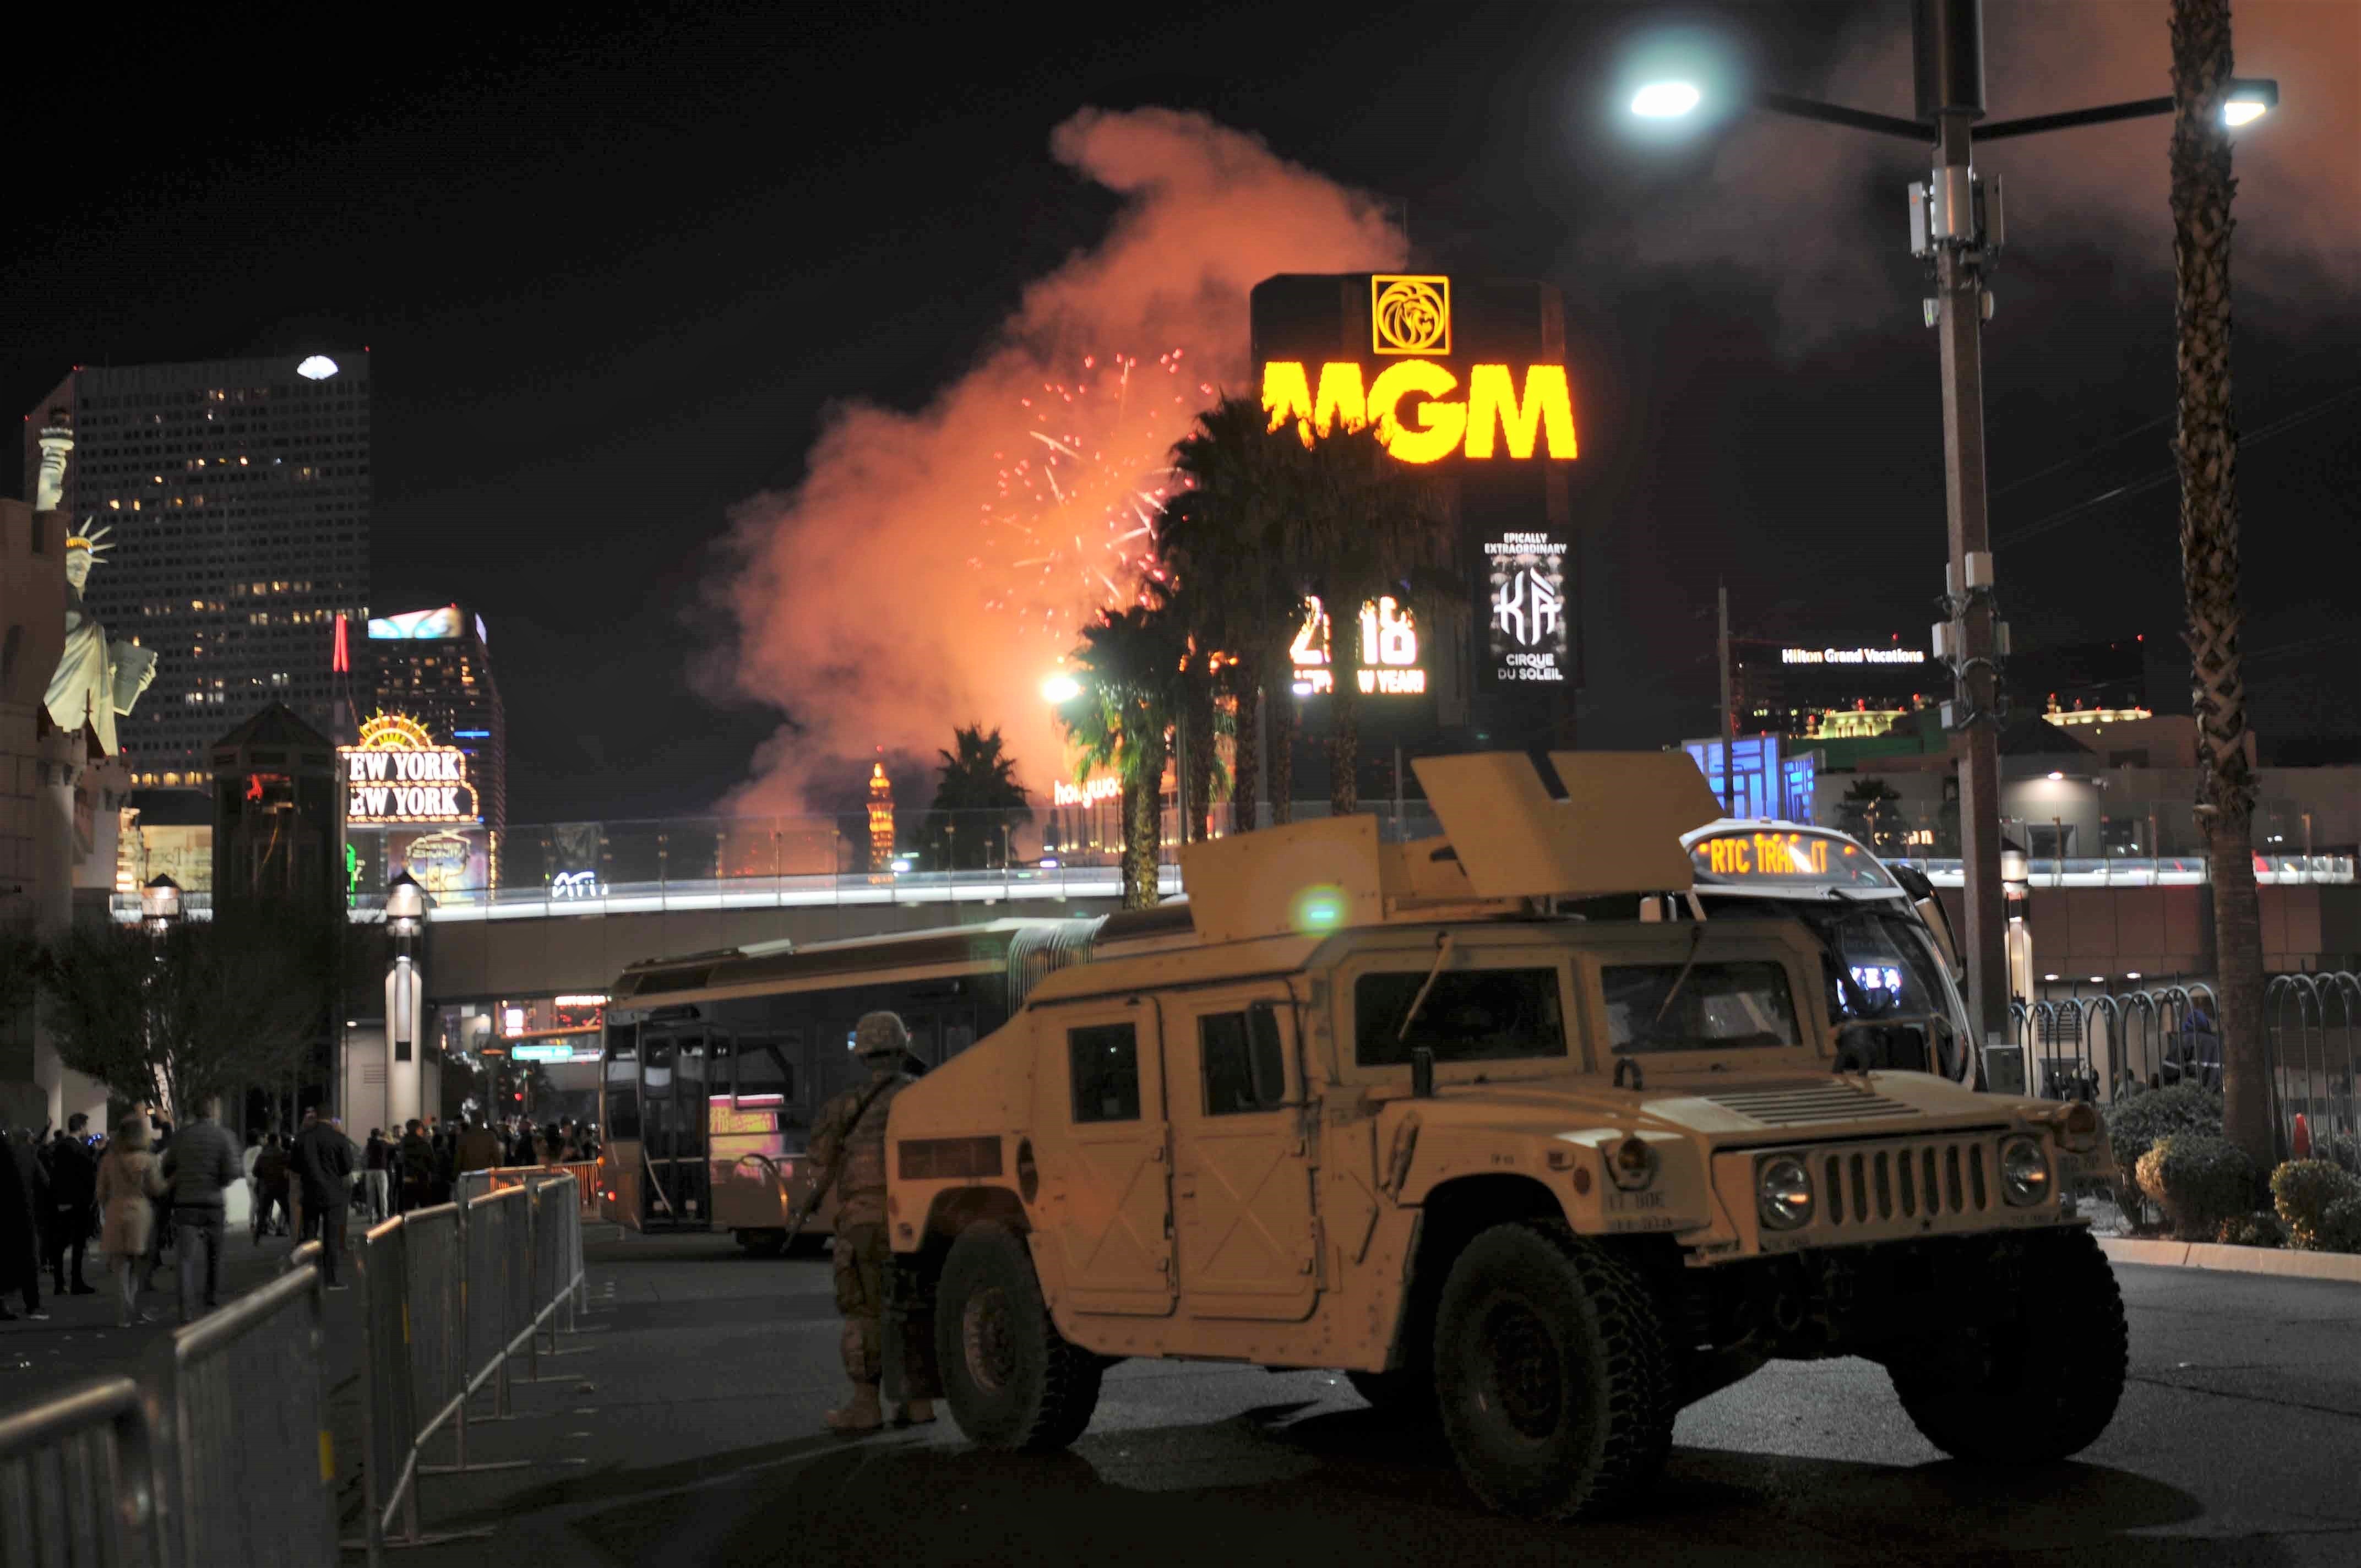 Nevada Guard on duty during 'America's party' in Las Vegas Article